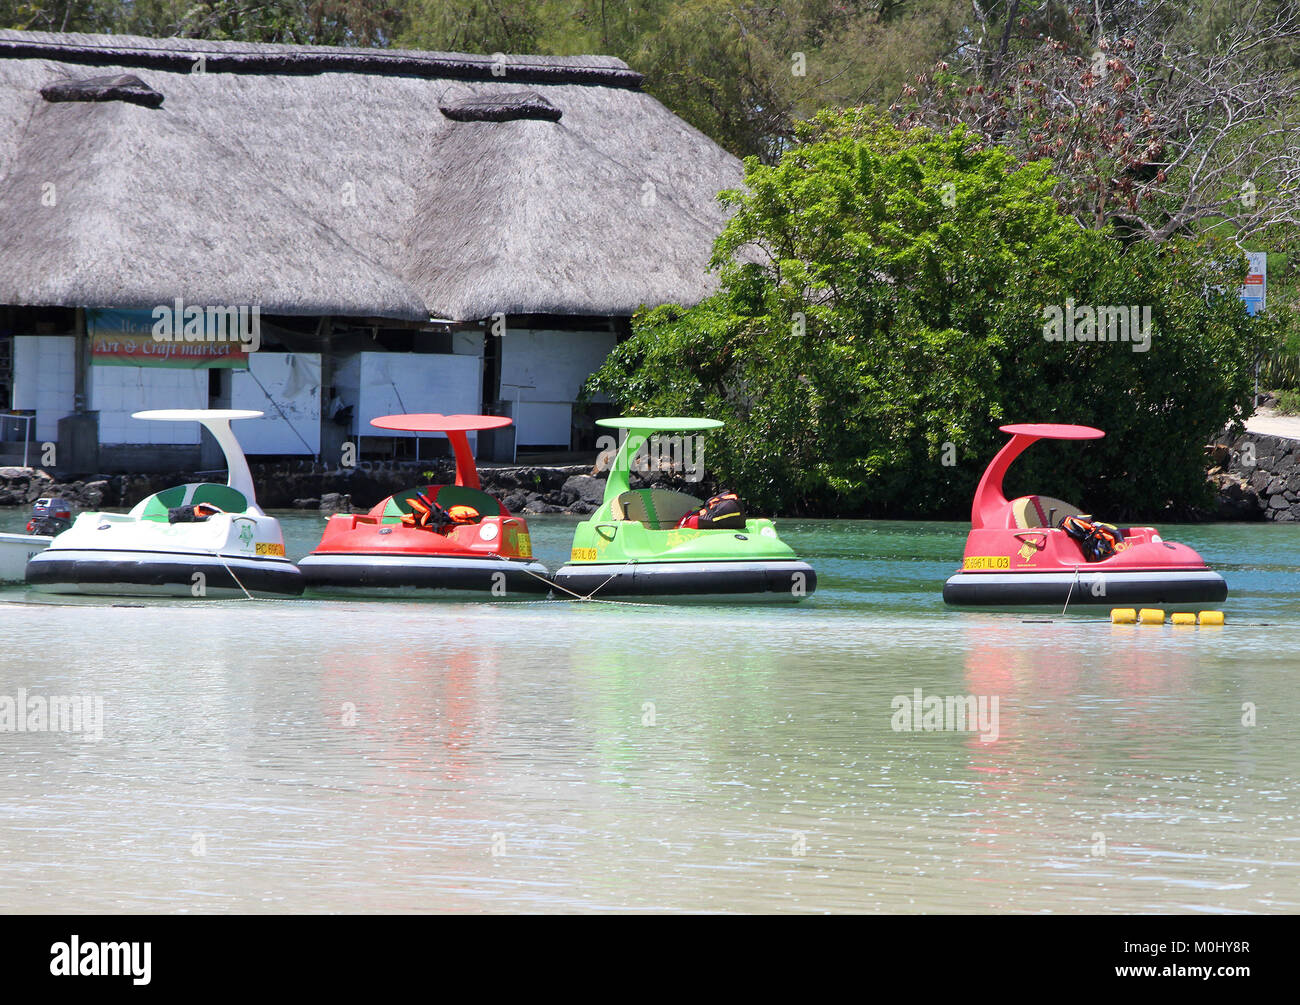 Tied up motorized bumper boats on The Ile Aux Cerfs, a privately owned island near the east coast of The Republic of Mauritius in the Flacq District. Stock Photo